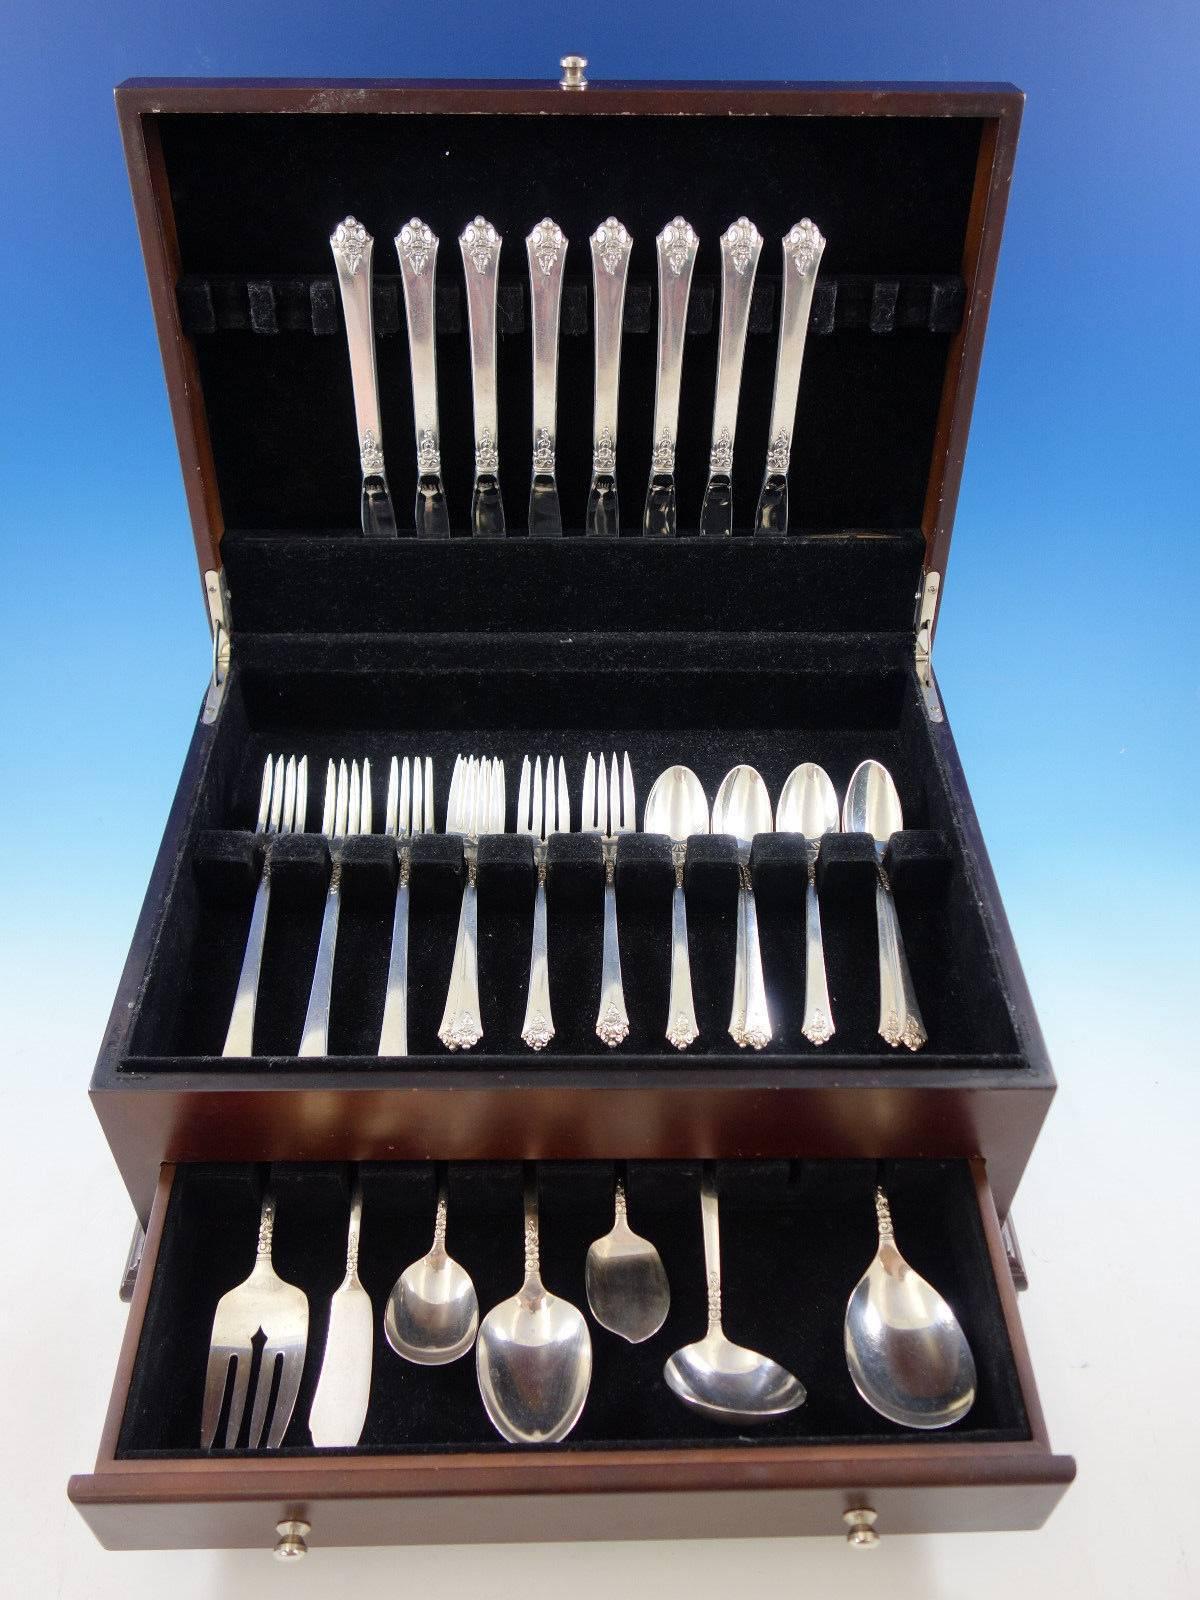 Grille size castle rose by Royal Crest sterling silver flatware set, 39 pieces. This set includes: 

Eight grille size knives, (with long handles) 8 3/8